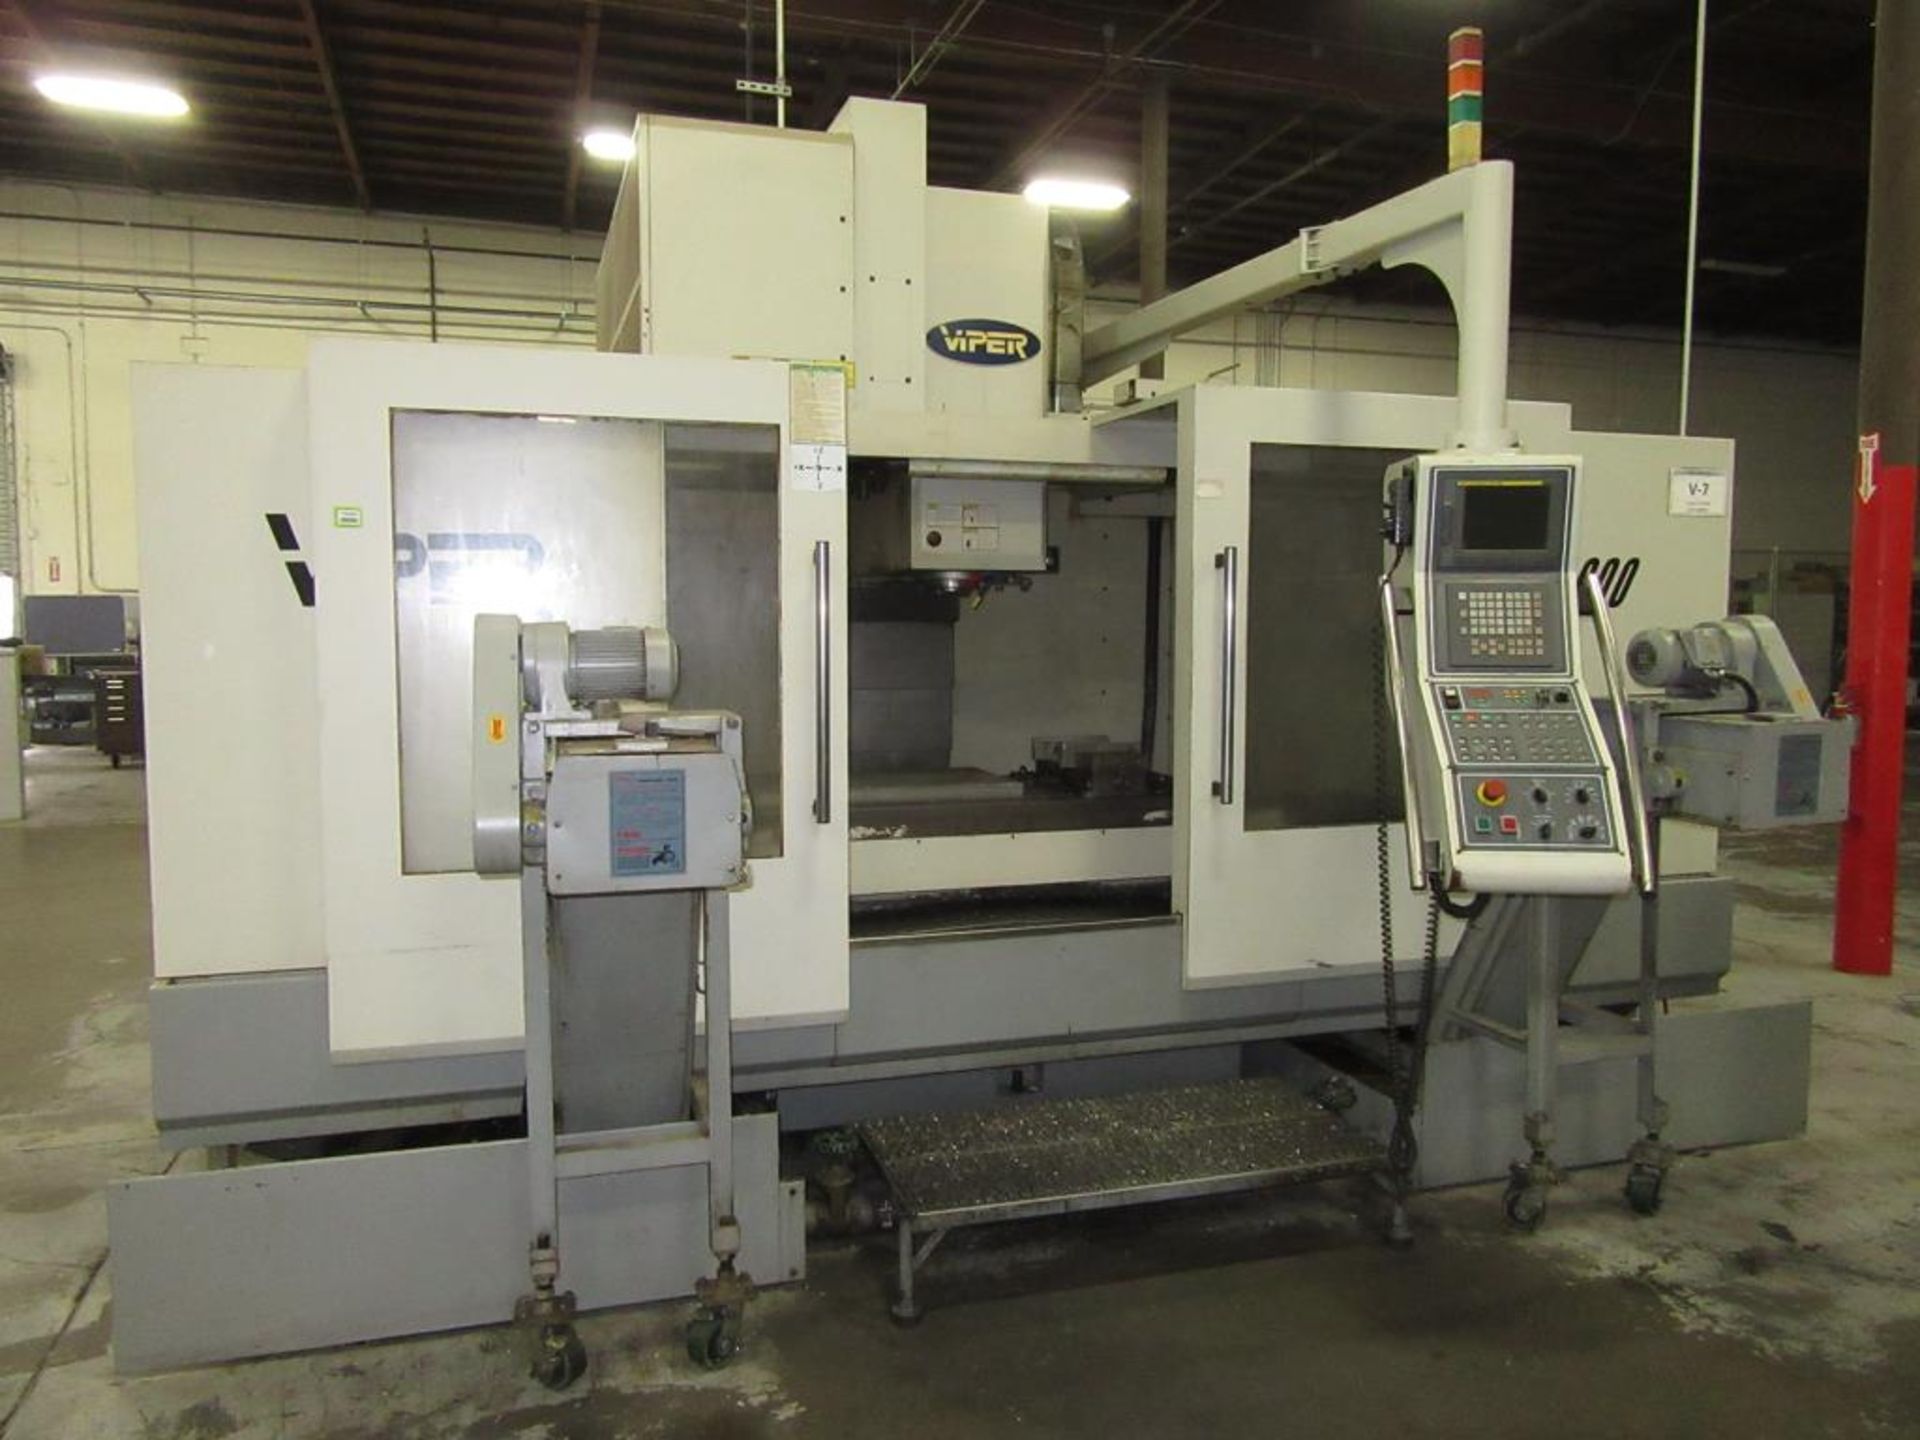 Mighty Viper VMC-1600A. 2006 - CNC Vertical Machining Center with Fanuc 21i-MB 3-Axis Control Panel, - Image 2 of 22